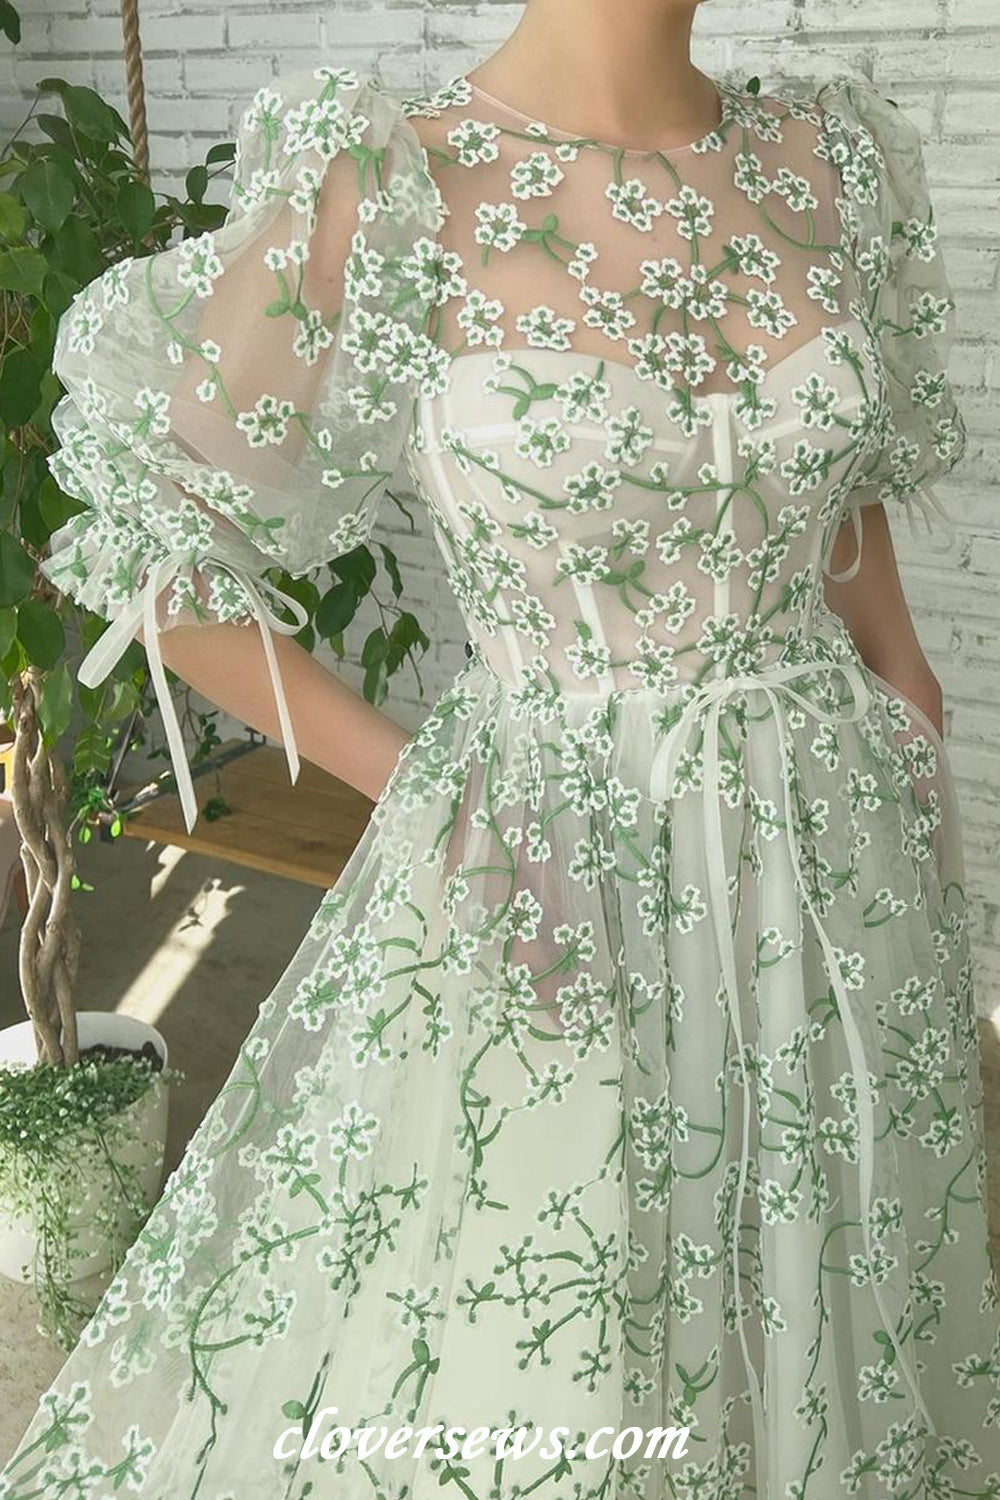 Green Embroidery Tulle Round Neck Half Sleeves Tea Length Spring Dresses,CP1139